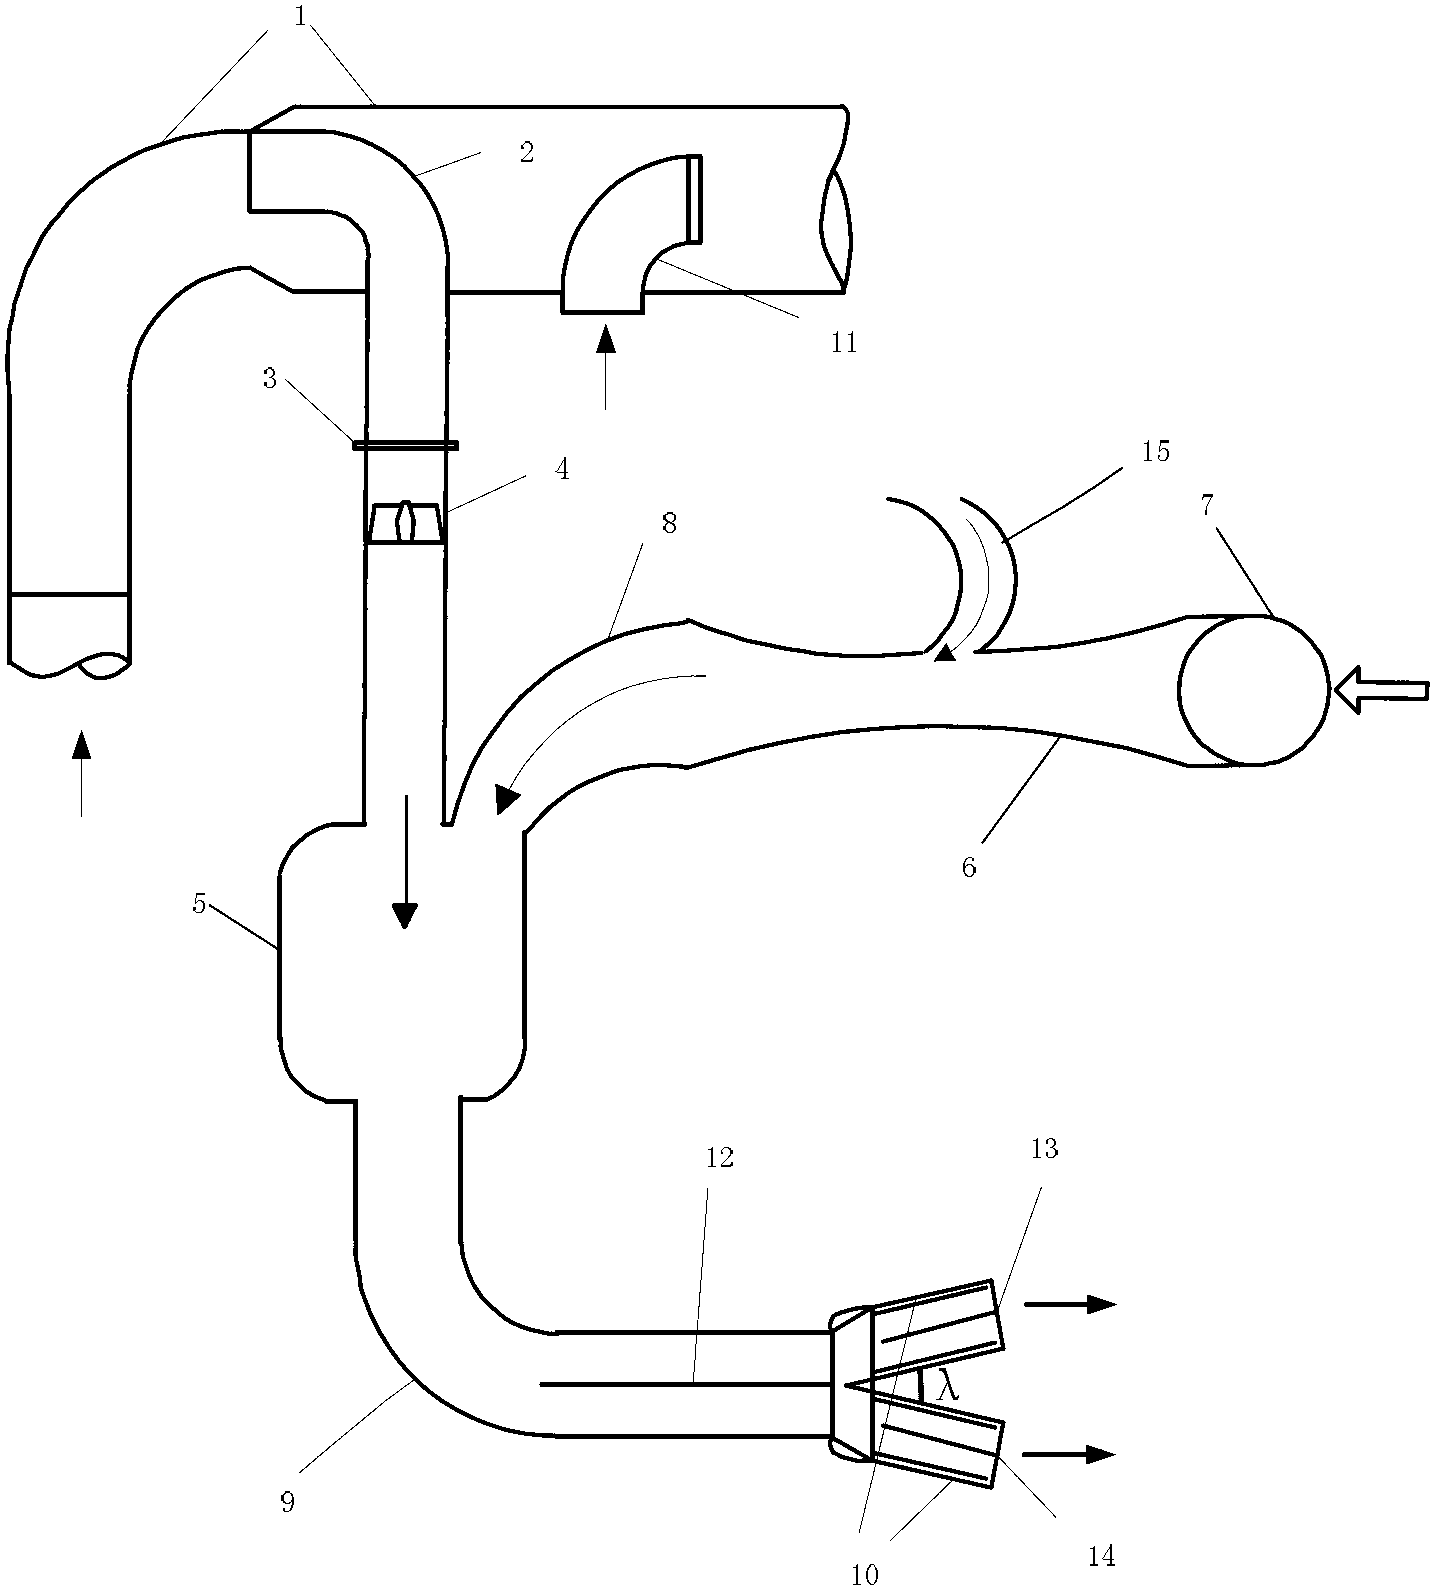 Low-load burner capable of achieving boiler flue heat recycling for boiler